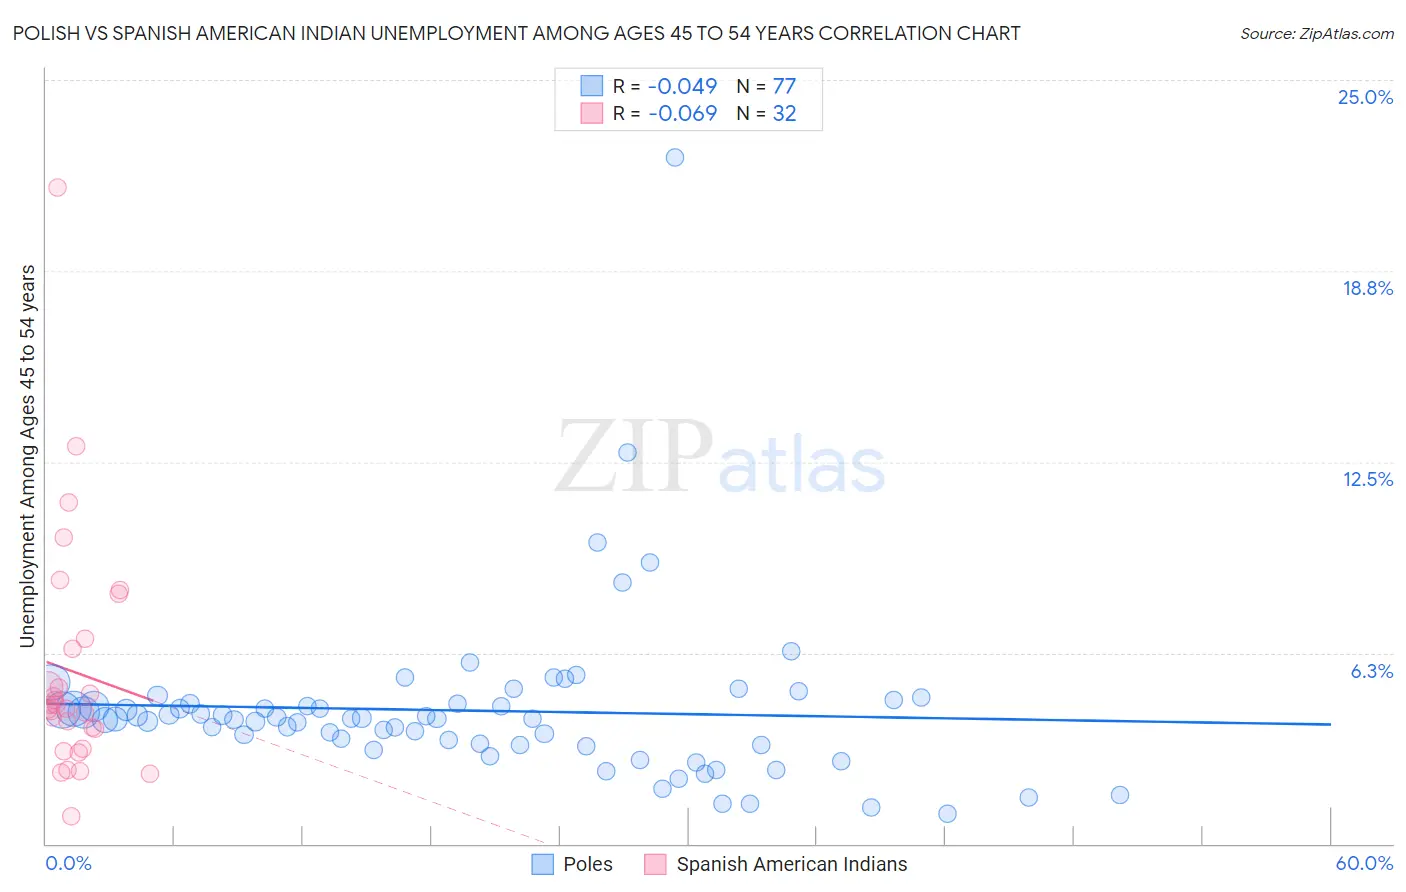 Polish vs Spanish American Indian Unemployment Among Ages 45 to 54 years